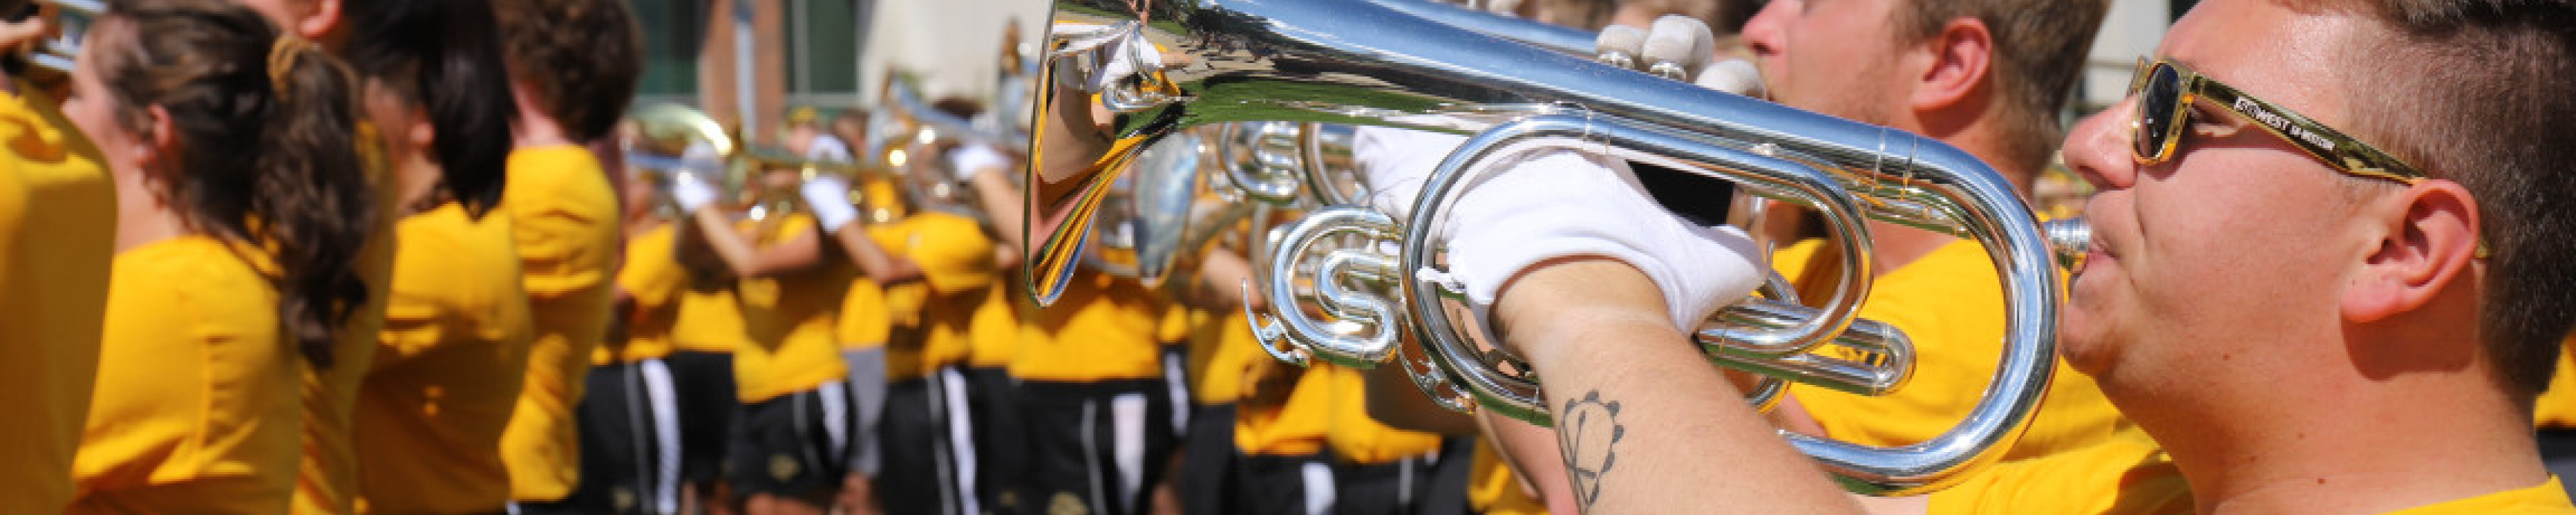 WMU marching band performs at Sangren Plaza